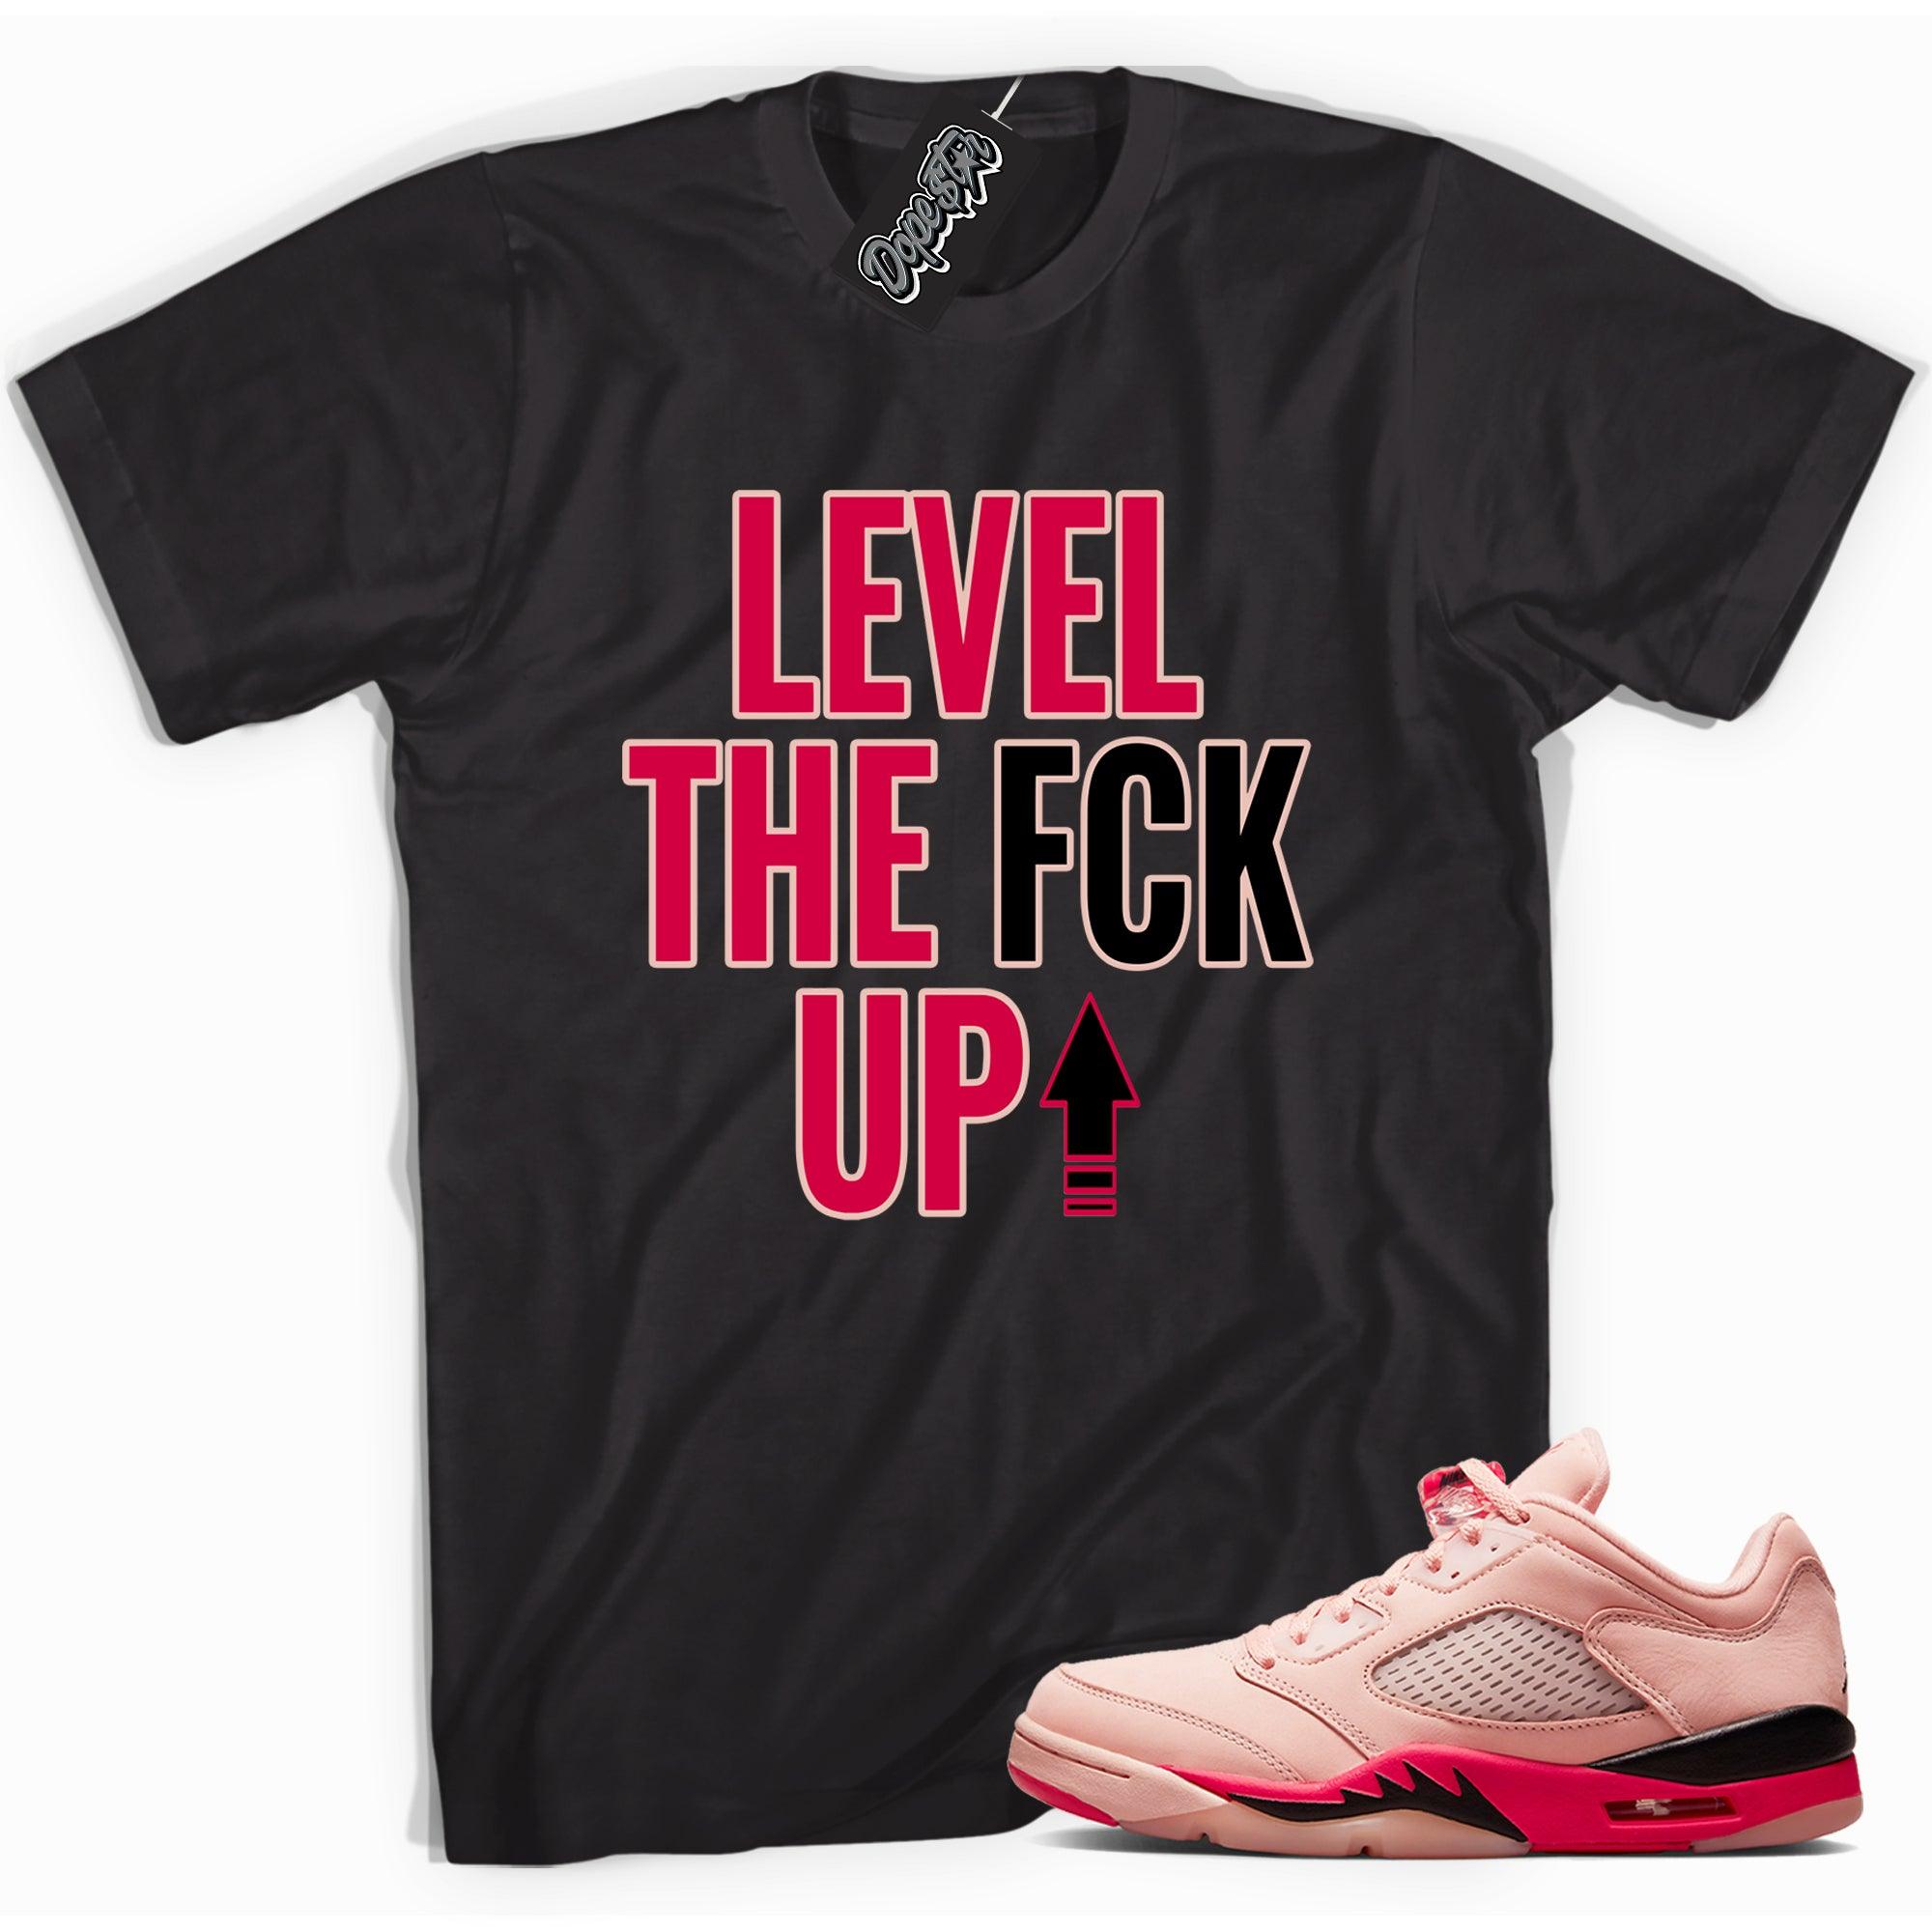 Cool black graphic tee with 'Level Up' print, that perfectly matches Air Jordan 5 Arctic Orange Toe sneakers.